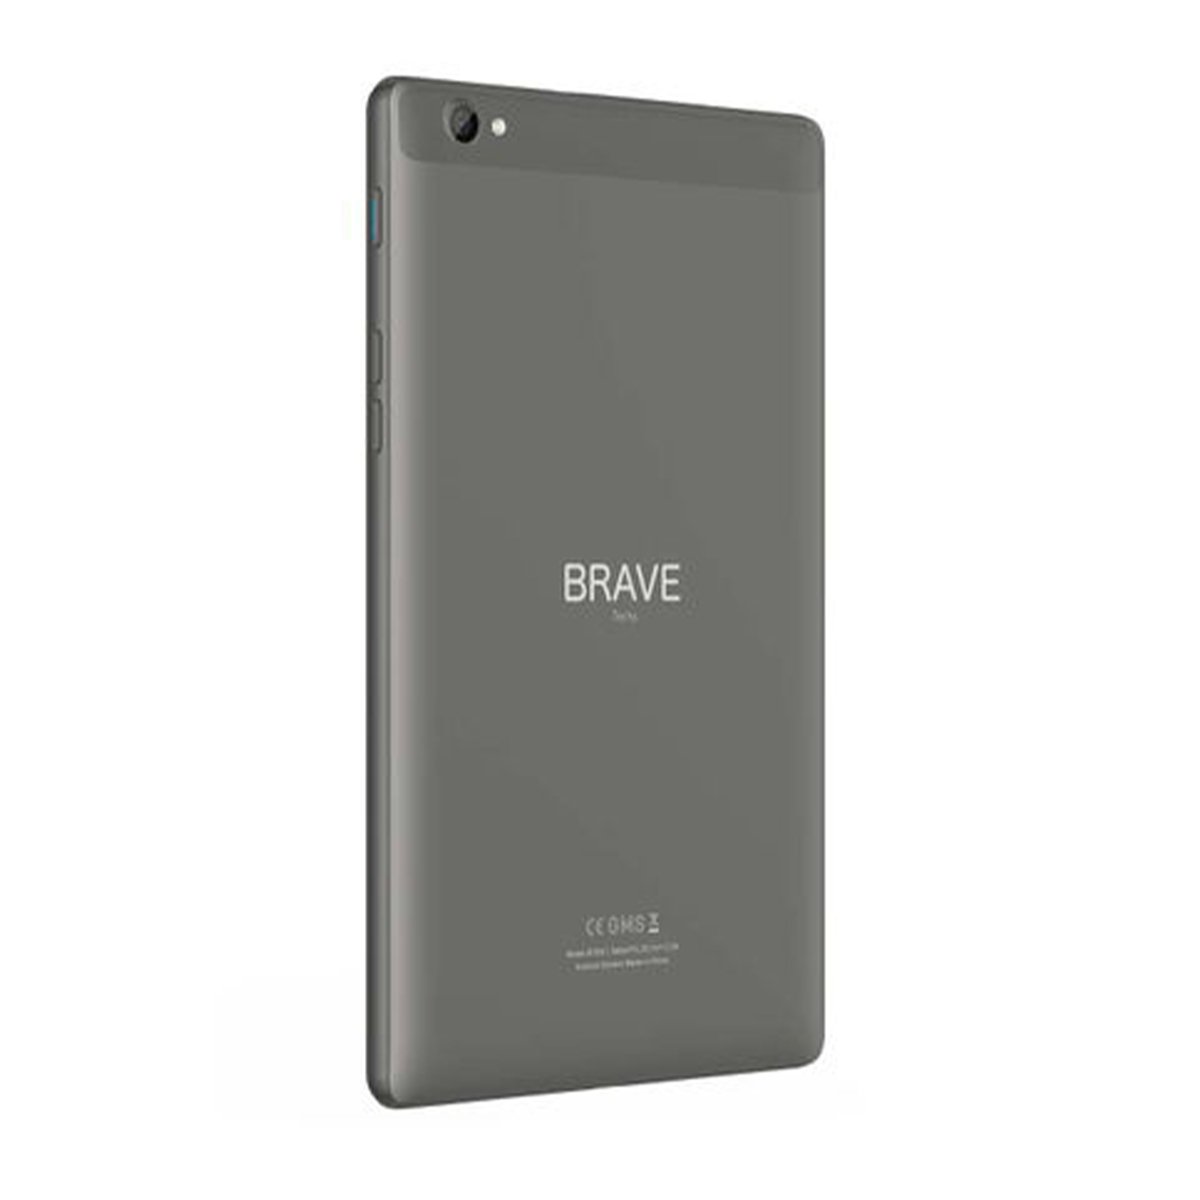 Brave Tab Vaso 8 inches 32GB WiFi Gray + Cover + Headset